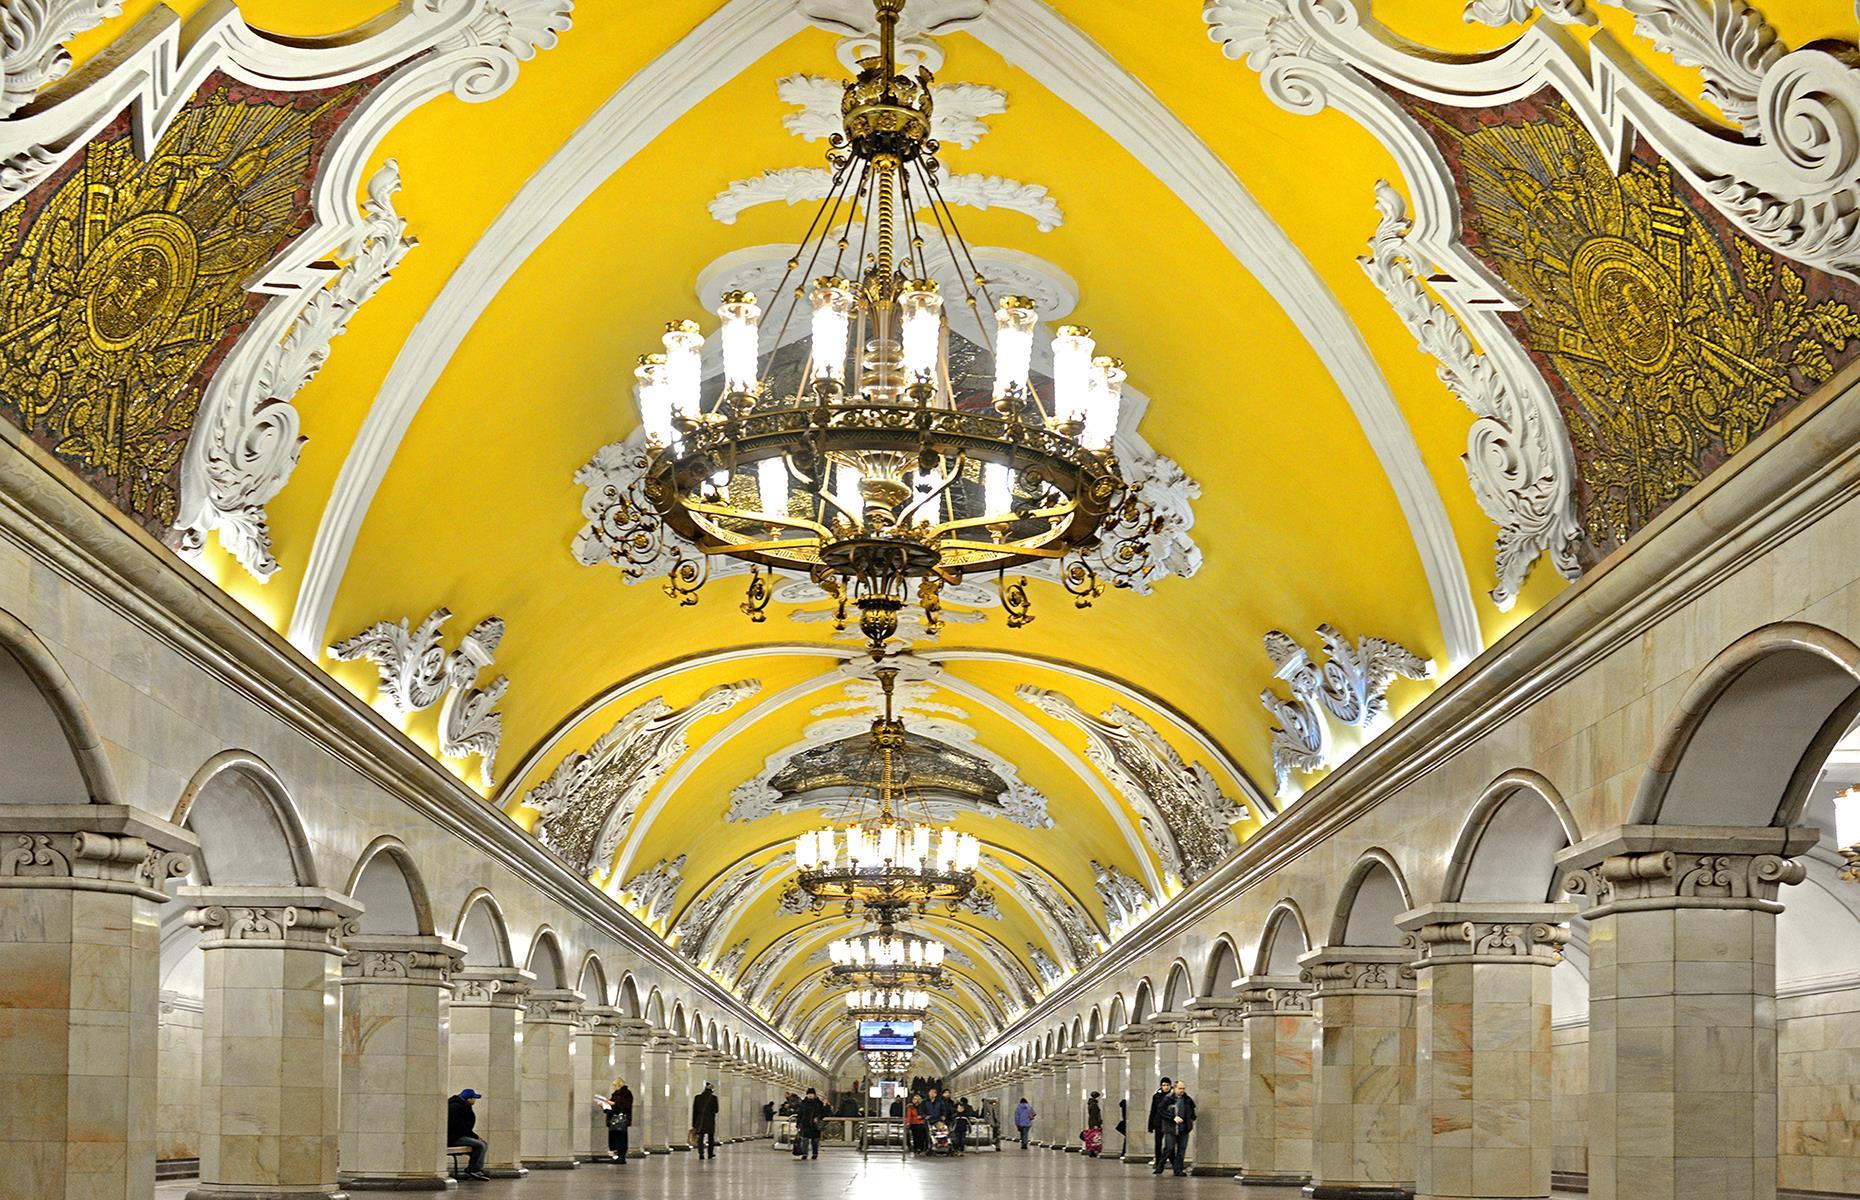 Moscow’s metro system, opened in 1935, is a collection of incredibly ornate stations that look much more like regal palaces or cathedrals rather than commuter hubs. Most, like Komsomolskaya, were built during Stalin’s reign and are meant to represent the wealth and power of the Soviet Union and the Communist Party.